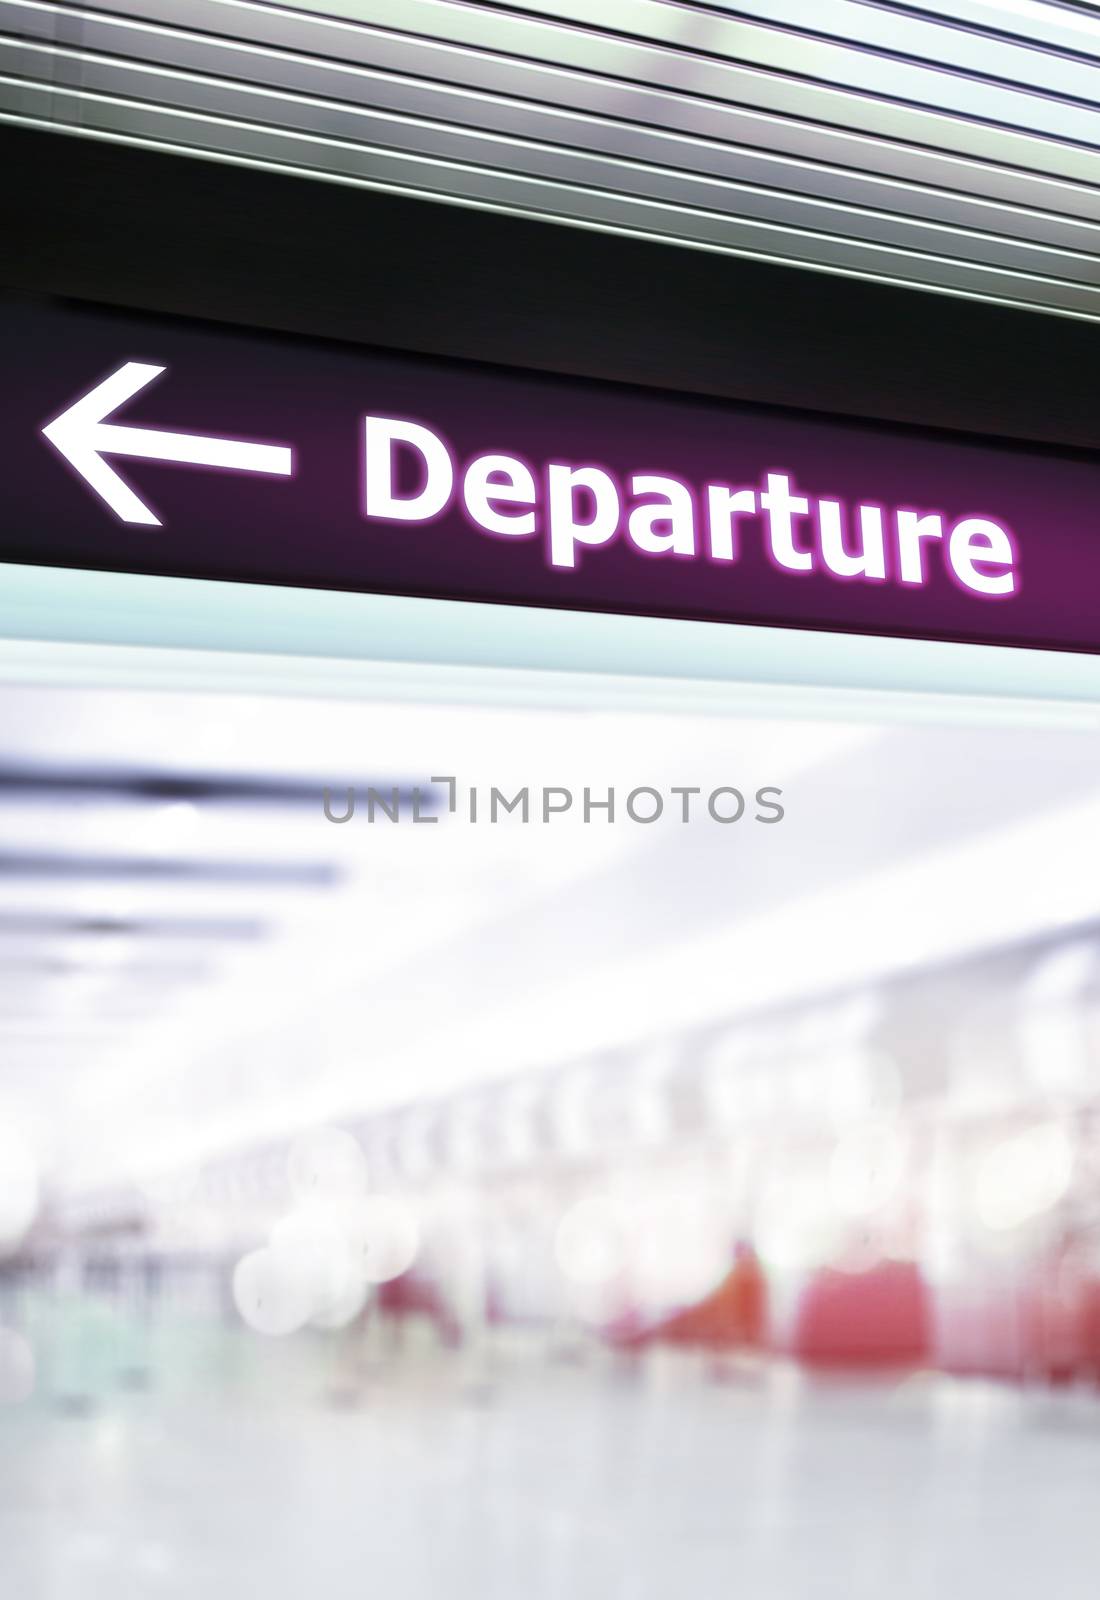 Tourist info signage in airport in international language